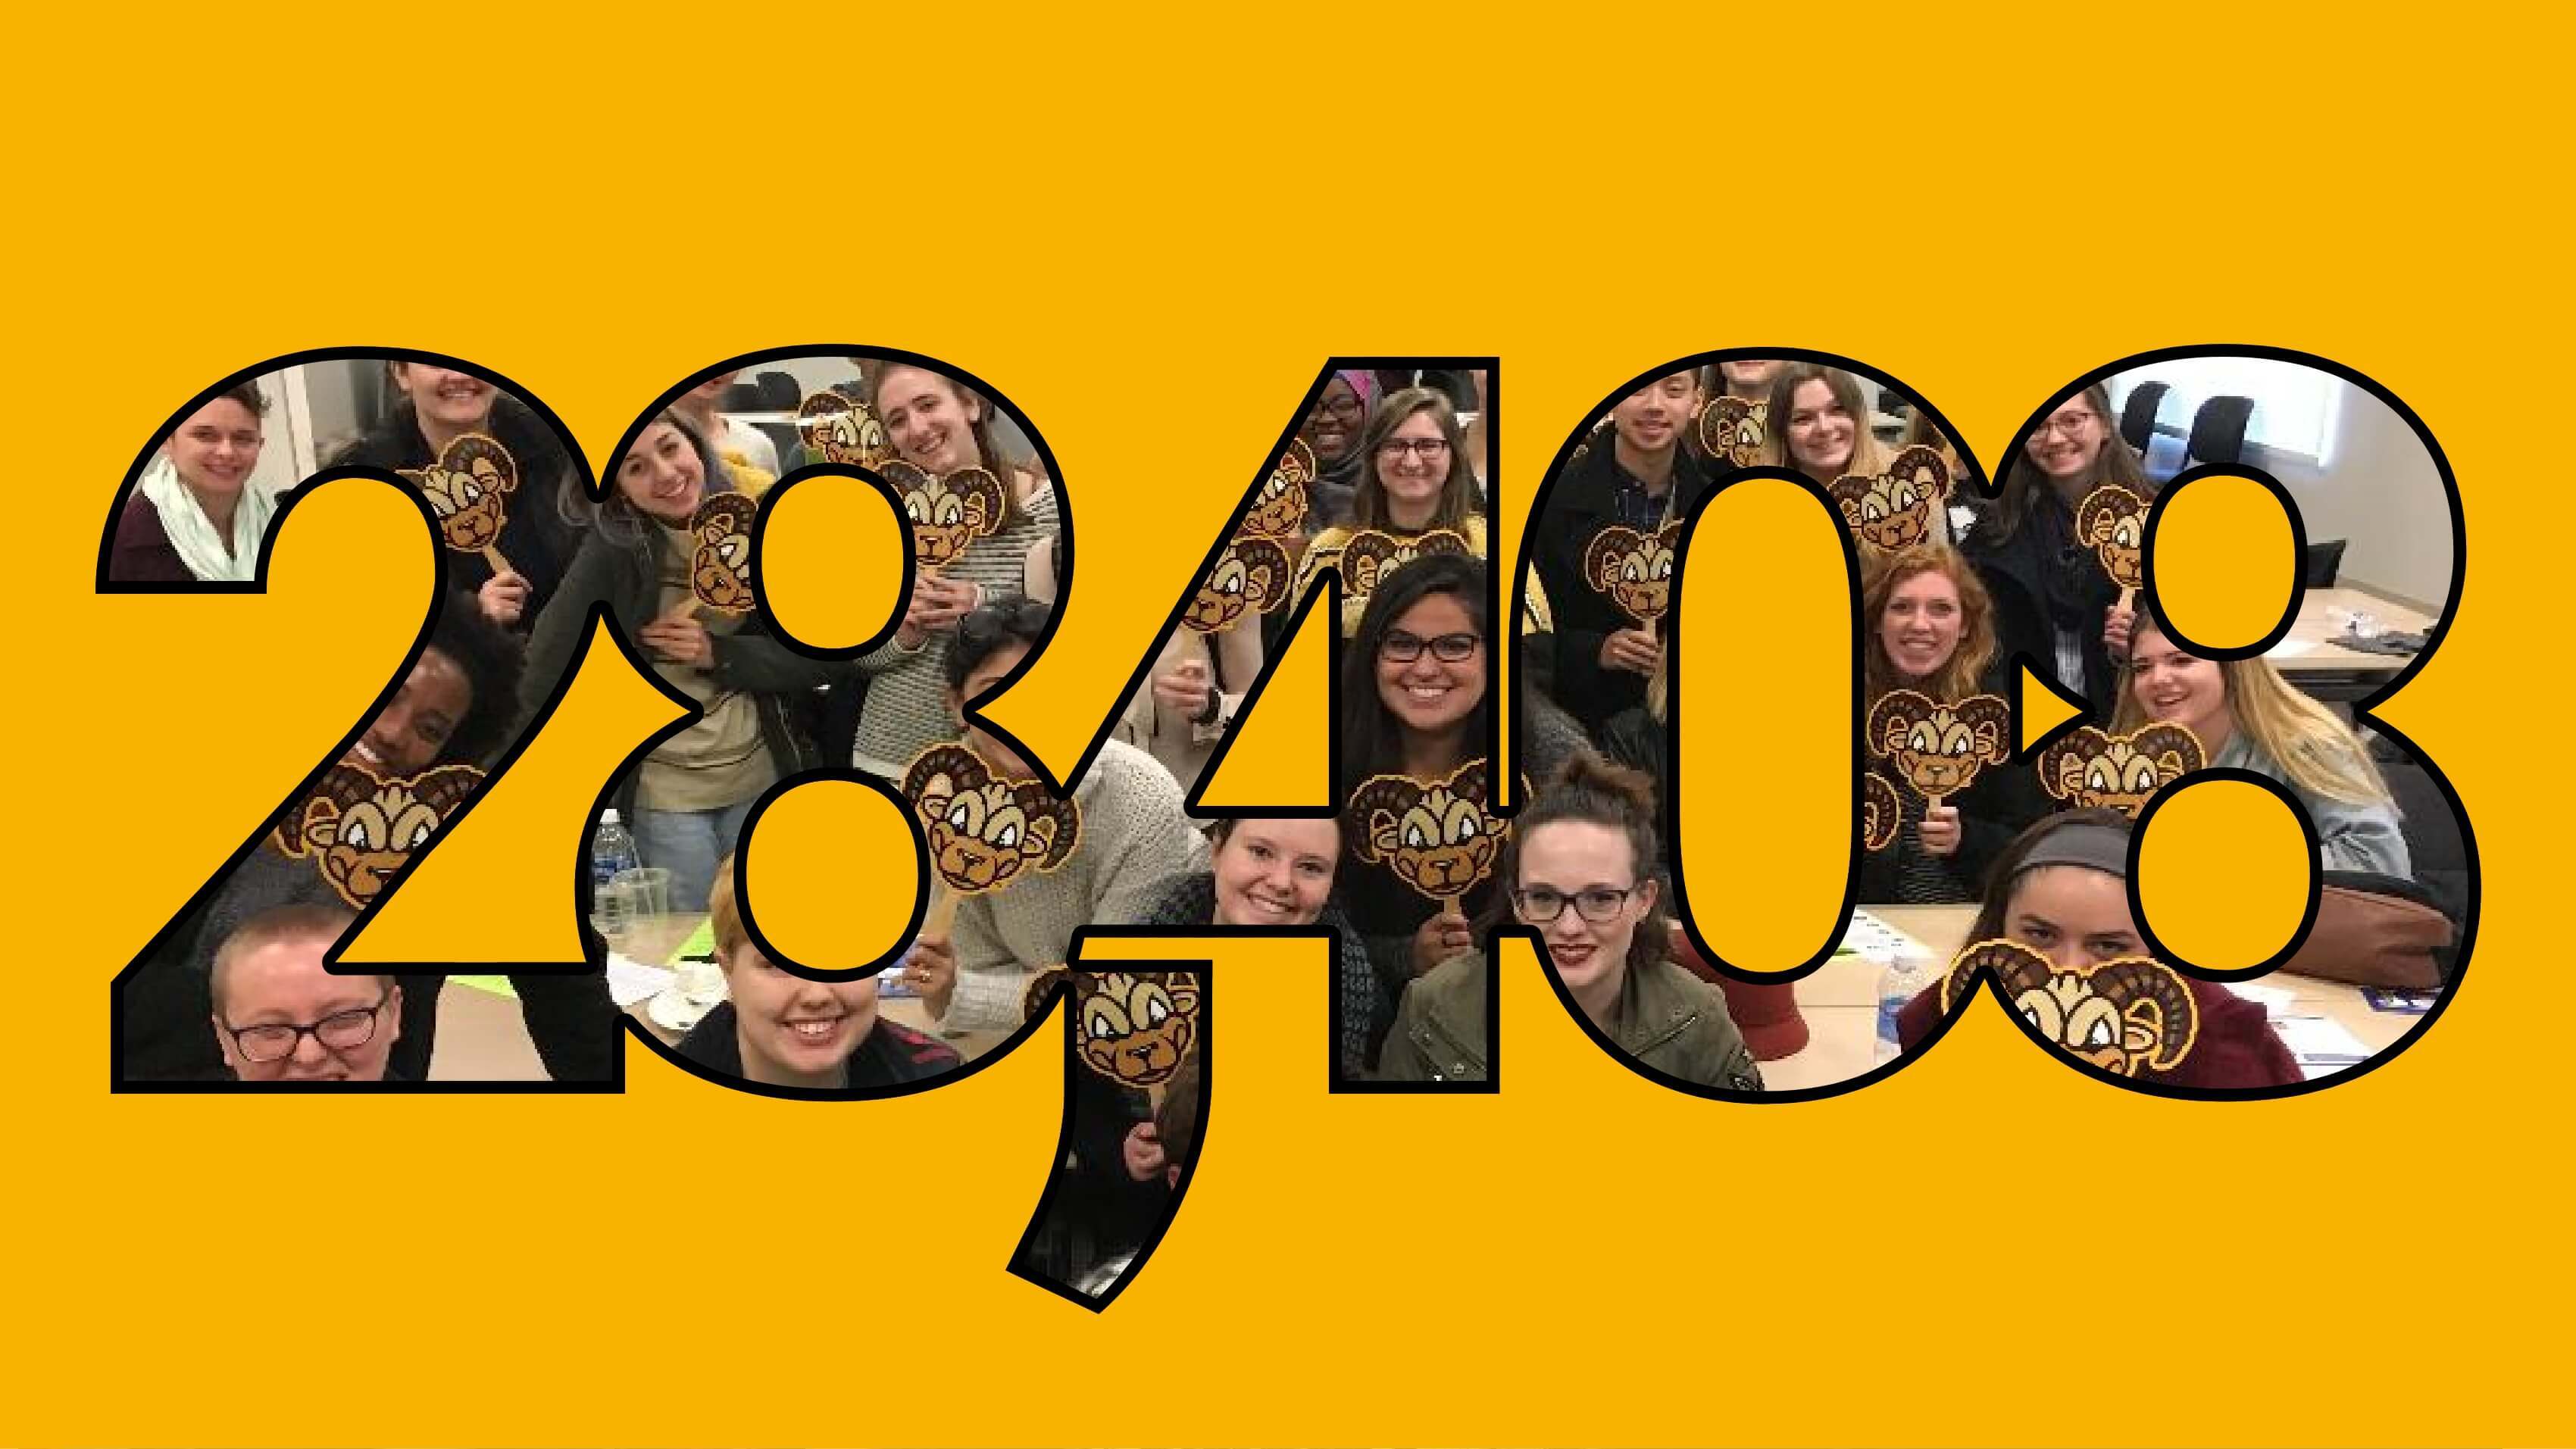 Large graphic image of the nuber 28,408, filled by a photo of smiling VCU students